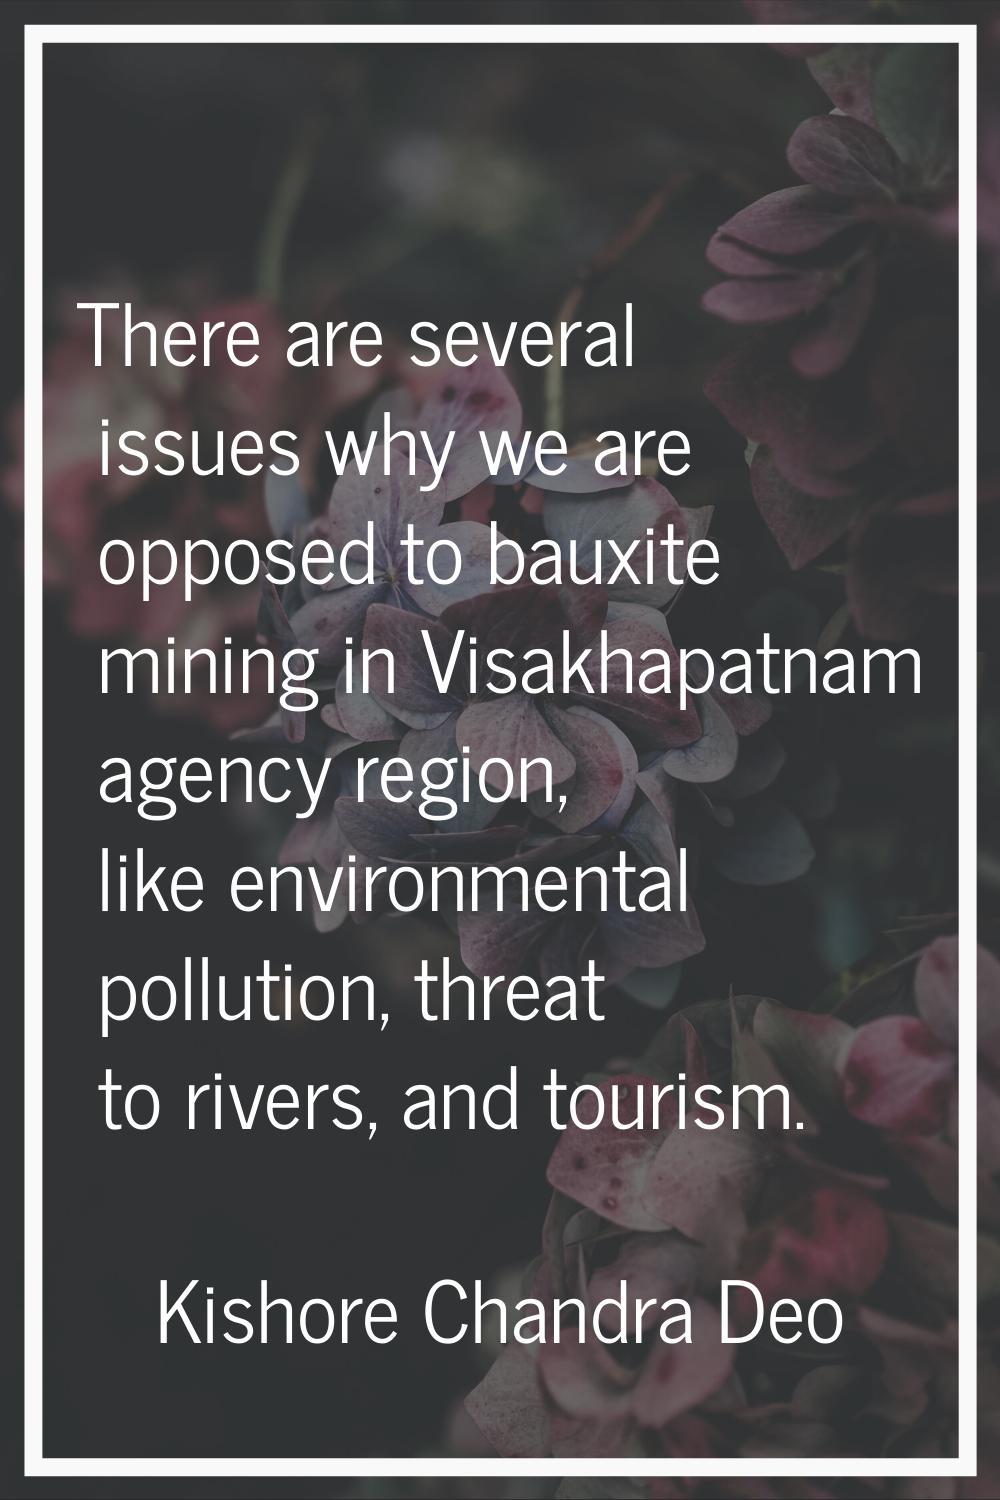 There are several issues why we are opposed to bauxite mining in Visakhapatnam agency region, like 